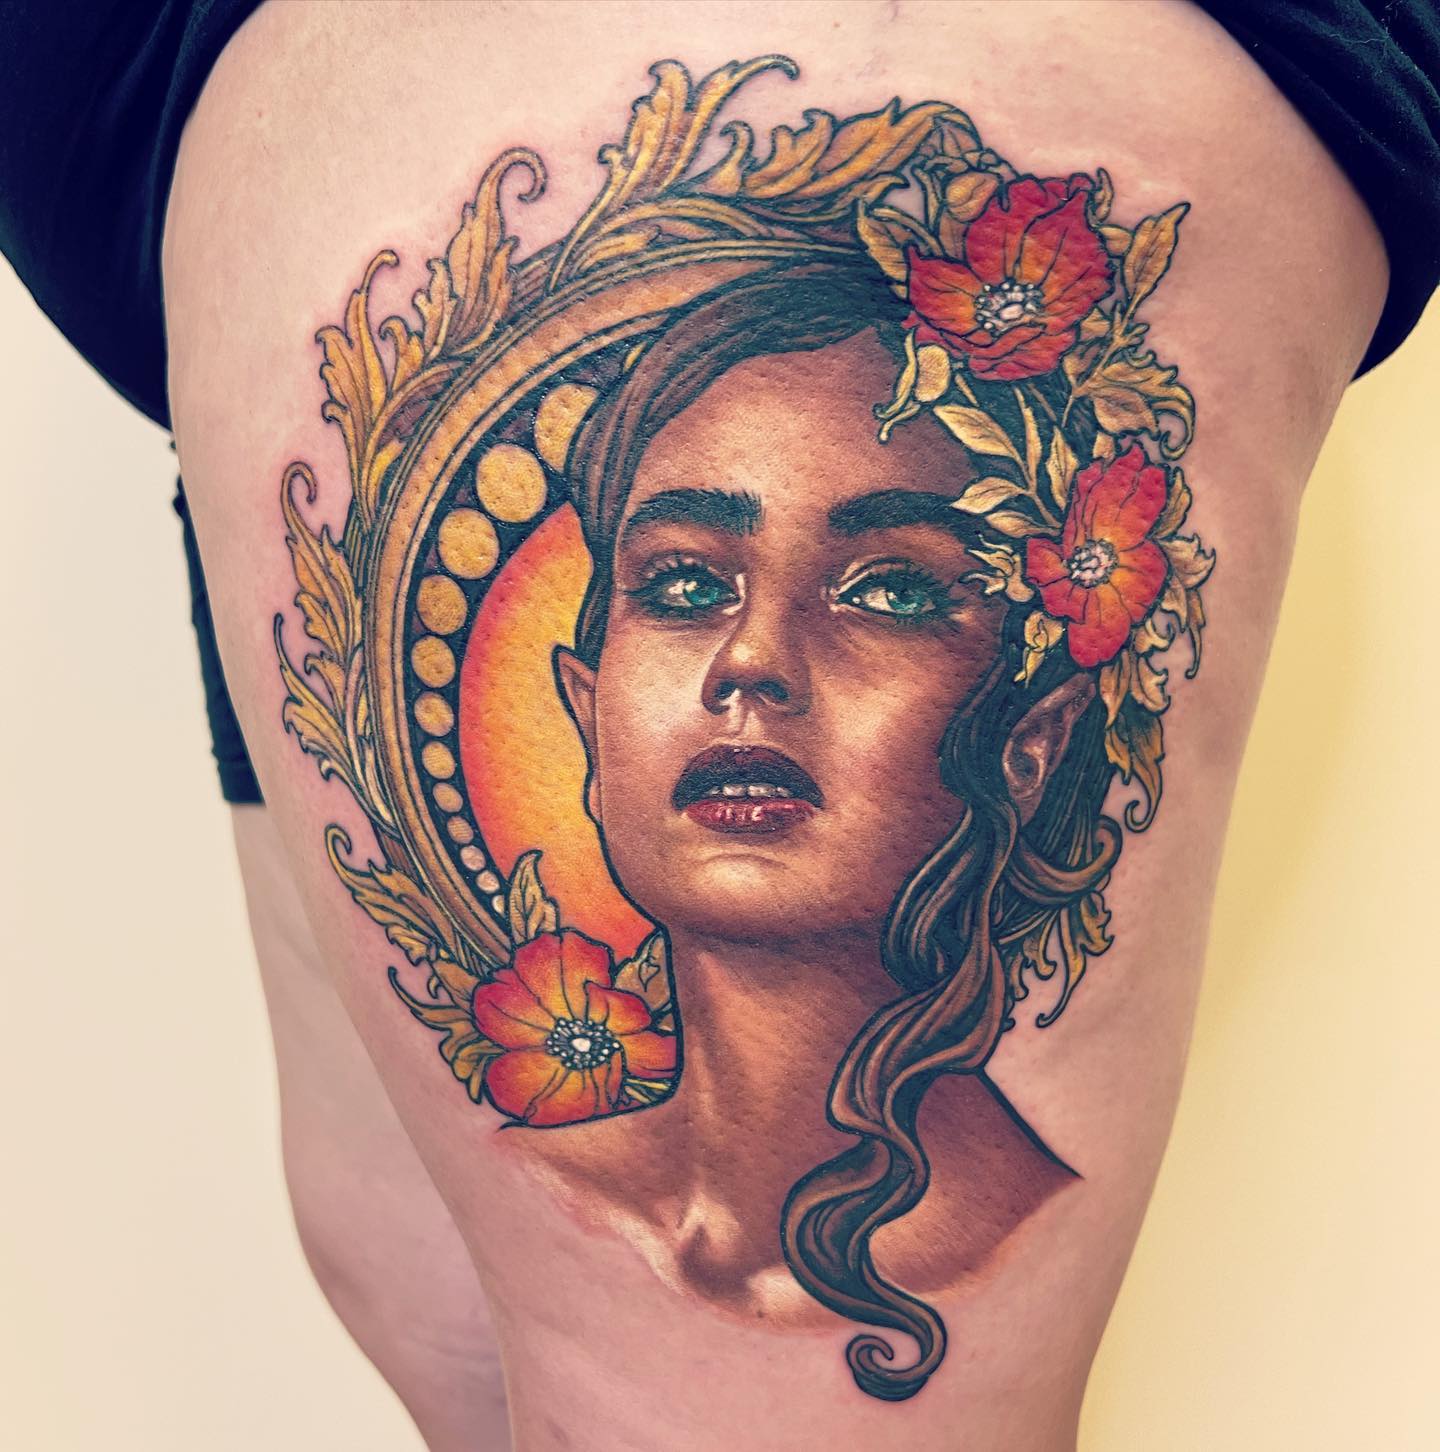 Amazing Portrait Tattoo On Arm Done by Sarah Miller